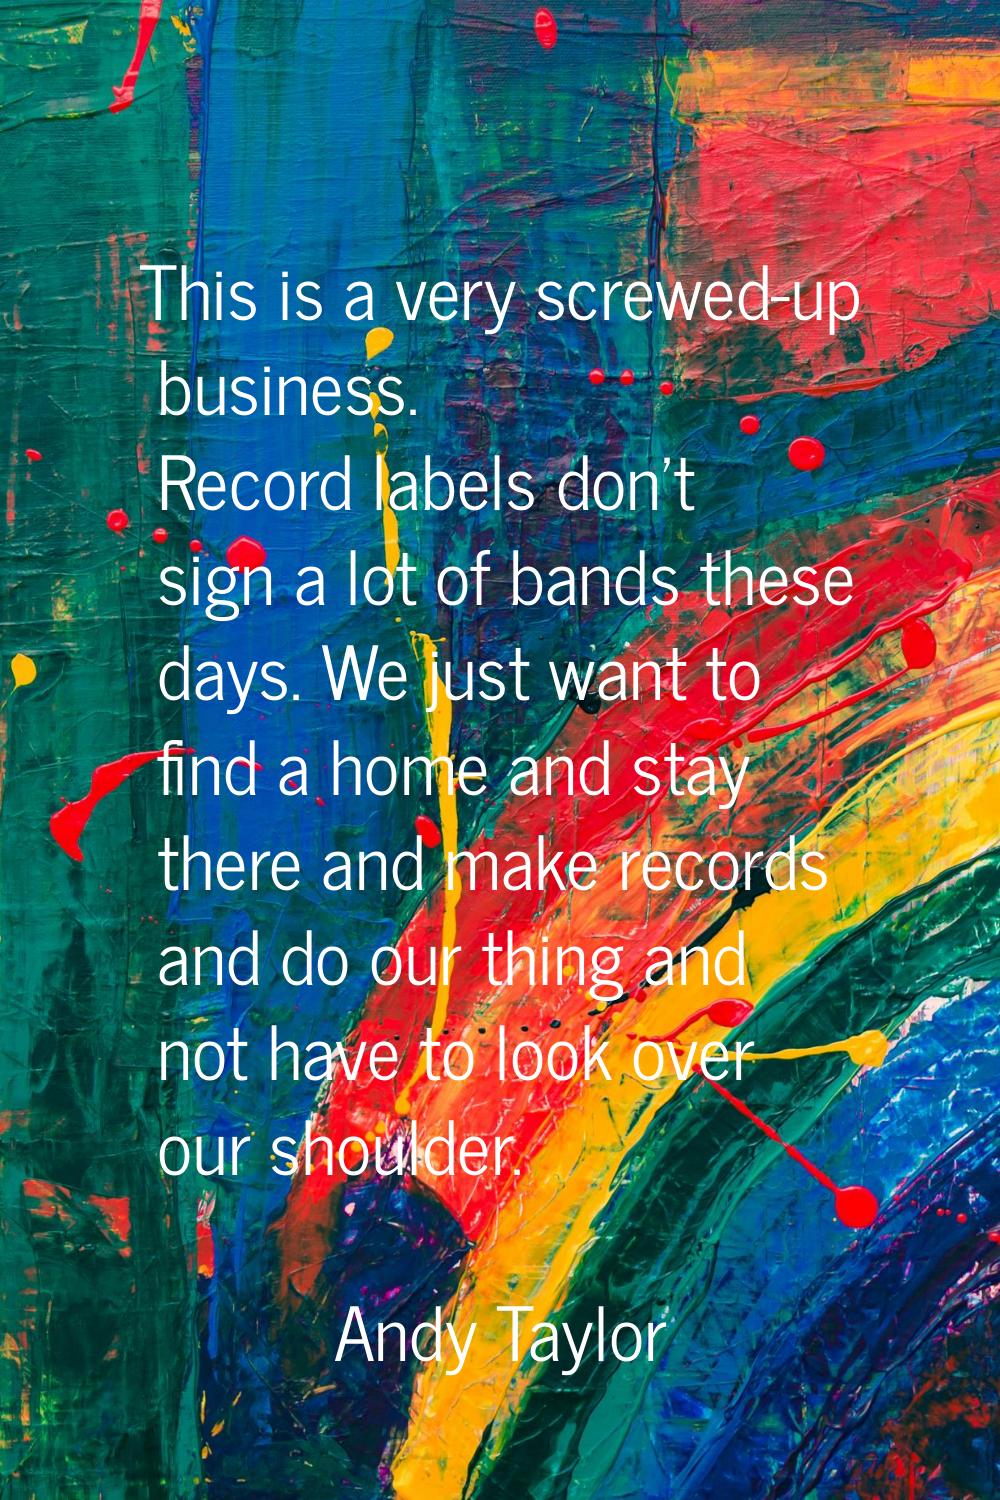 This is a very screwed-up business. Record labels don't sign a lot of bands these days. We just wan